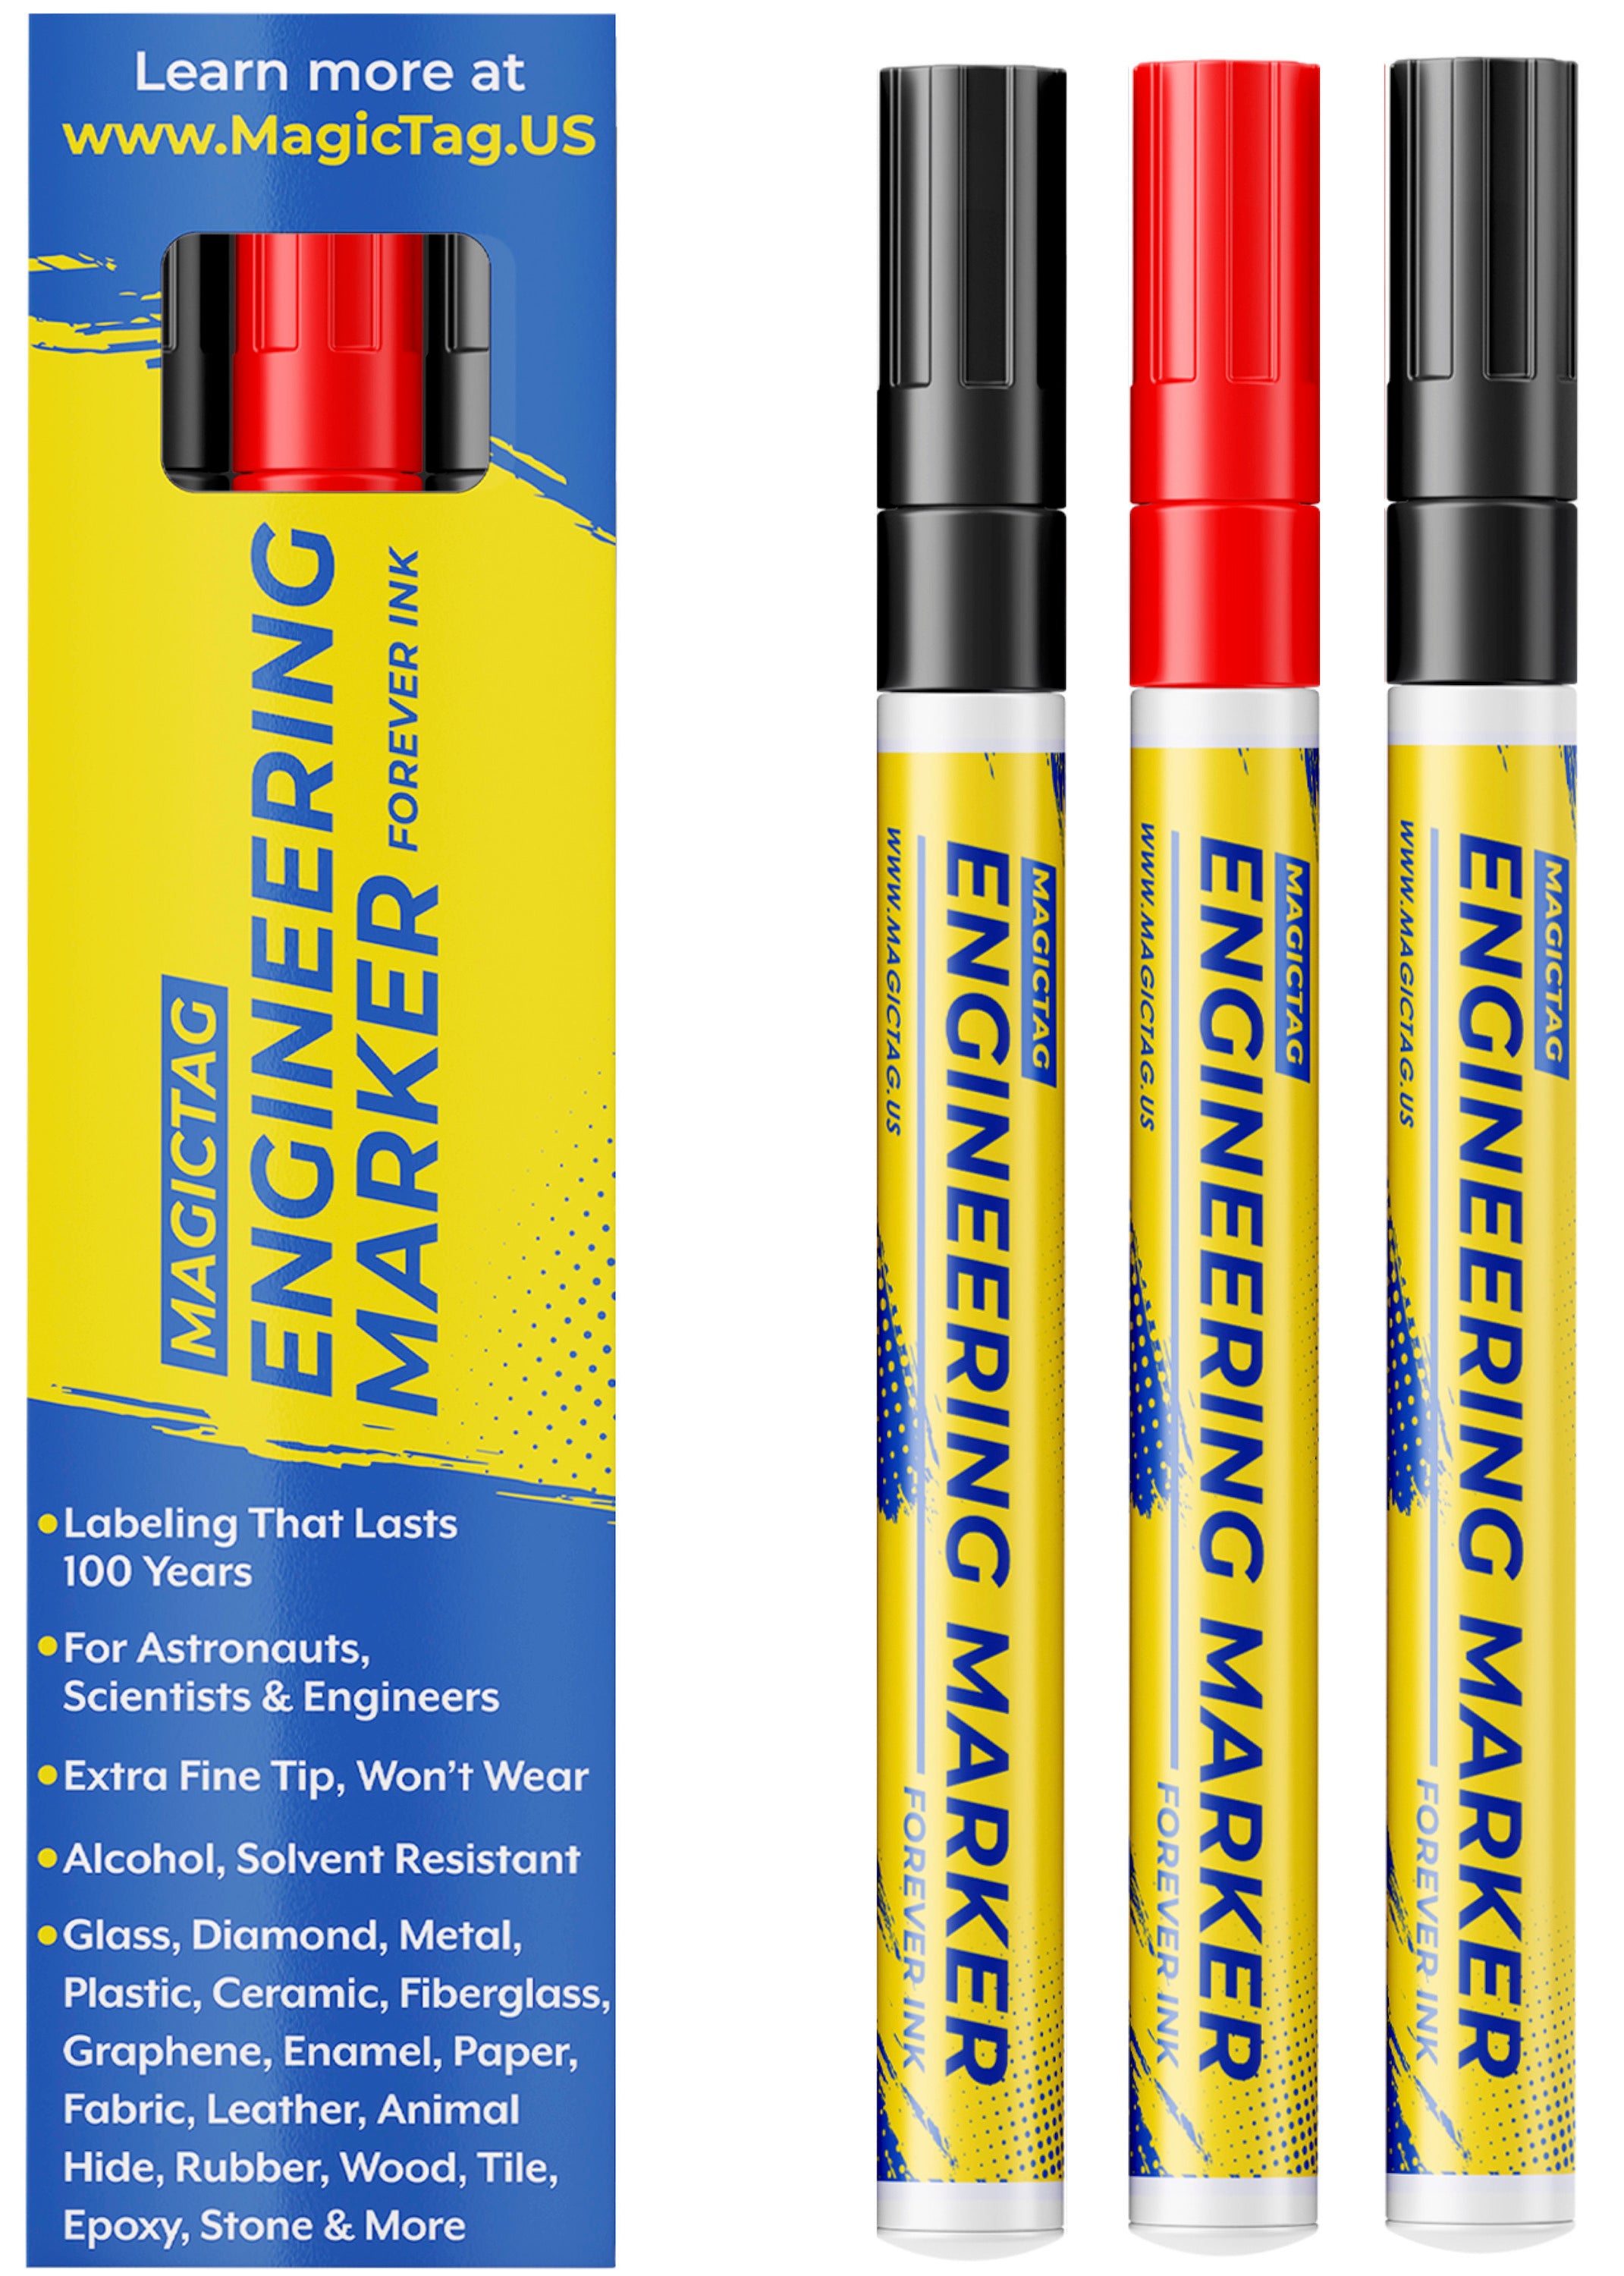 Alcohol, Chemical, & Solvent Resistant Markers and  Tags